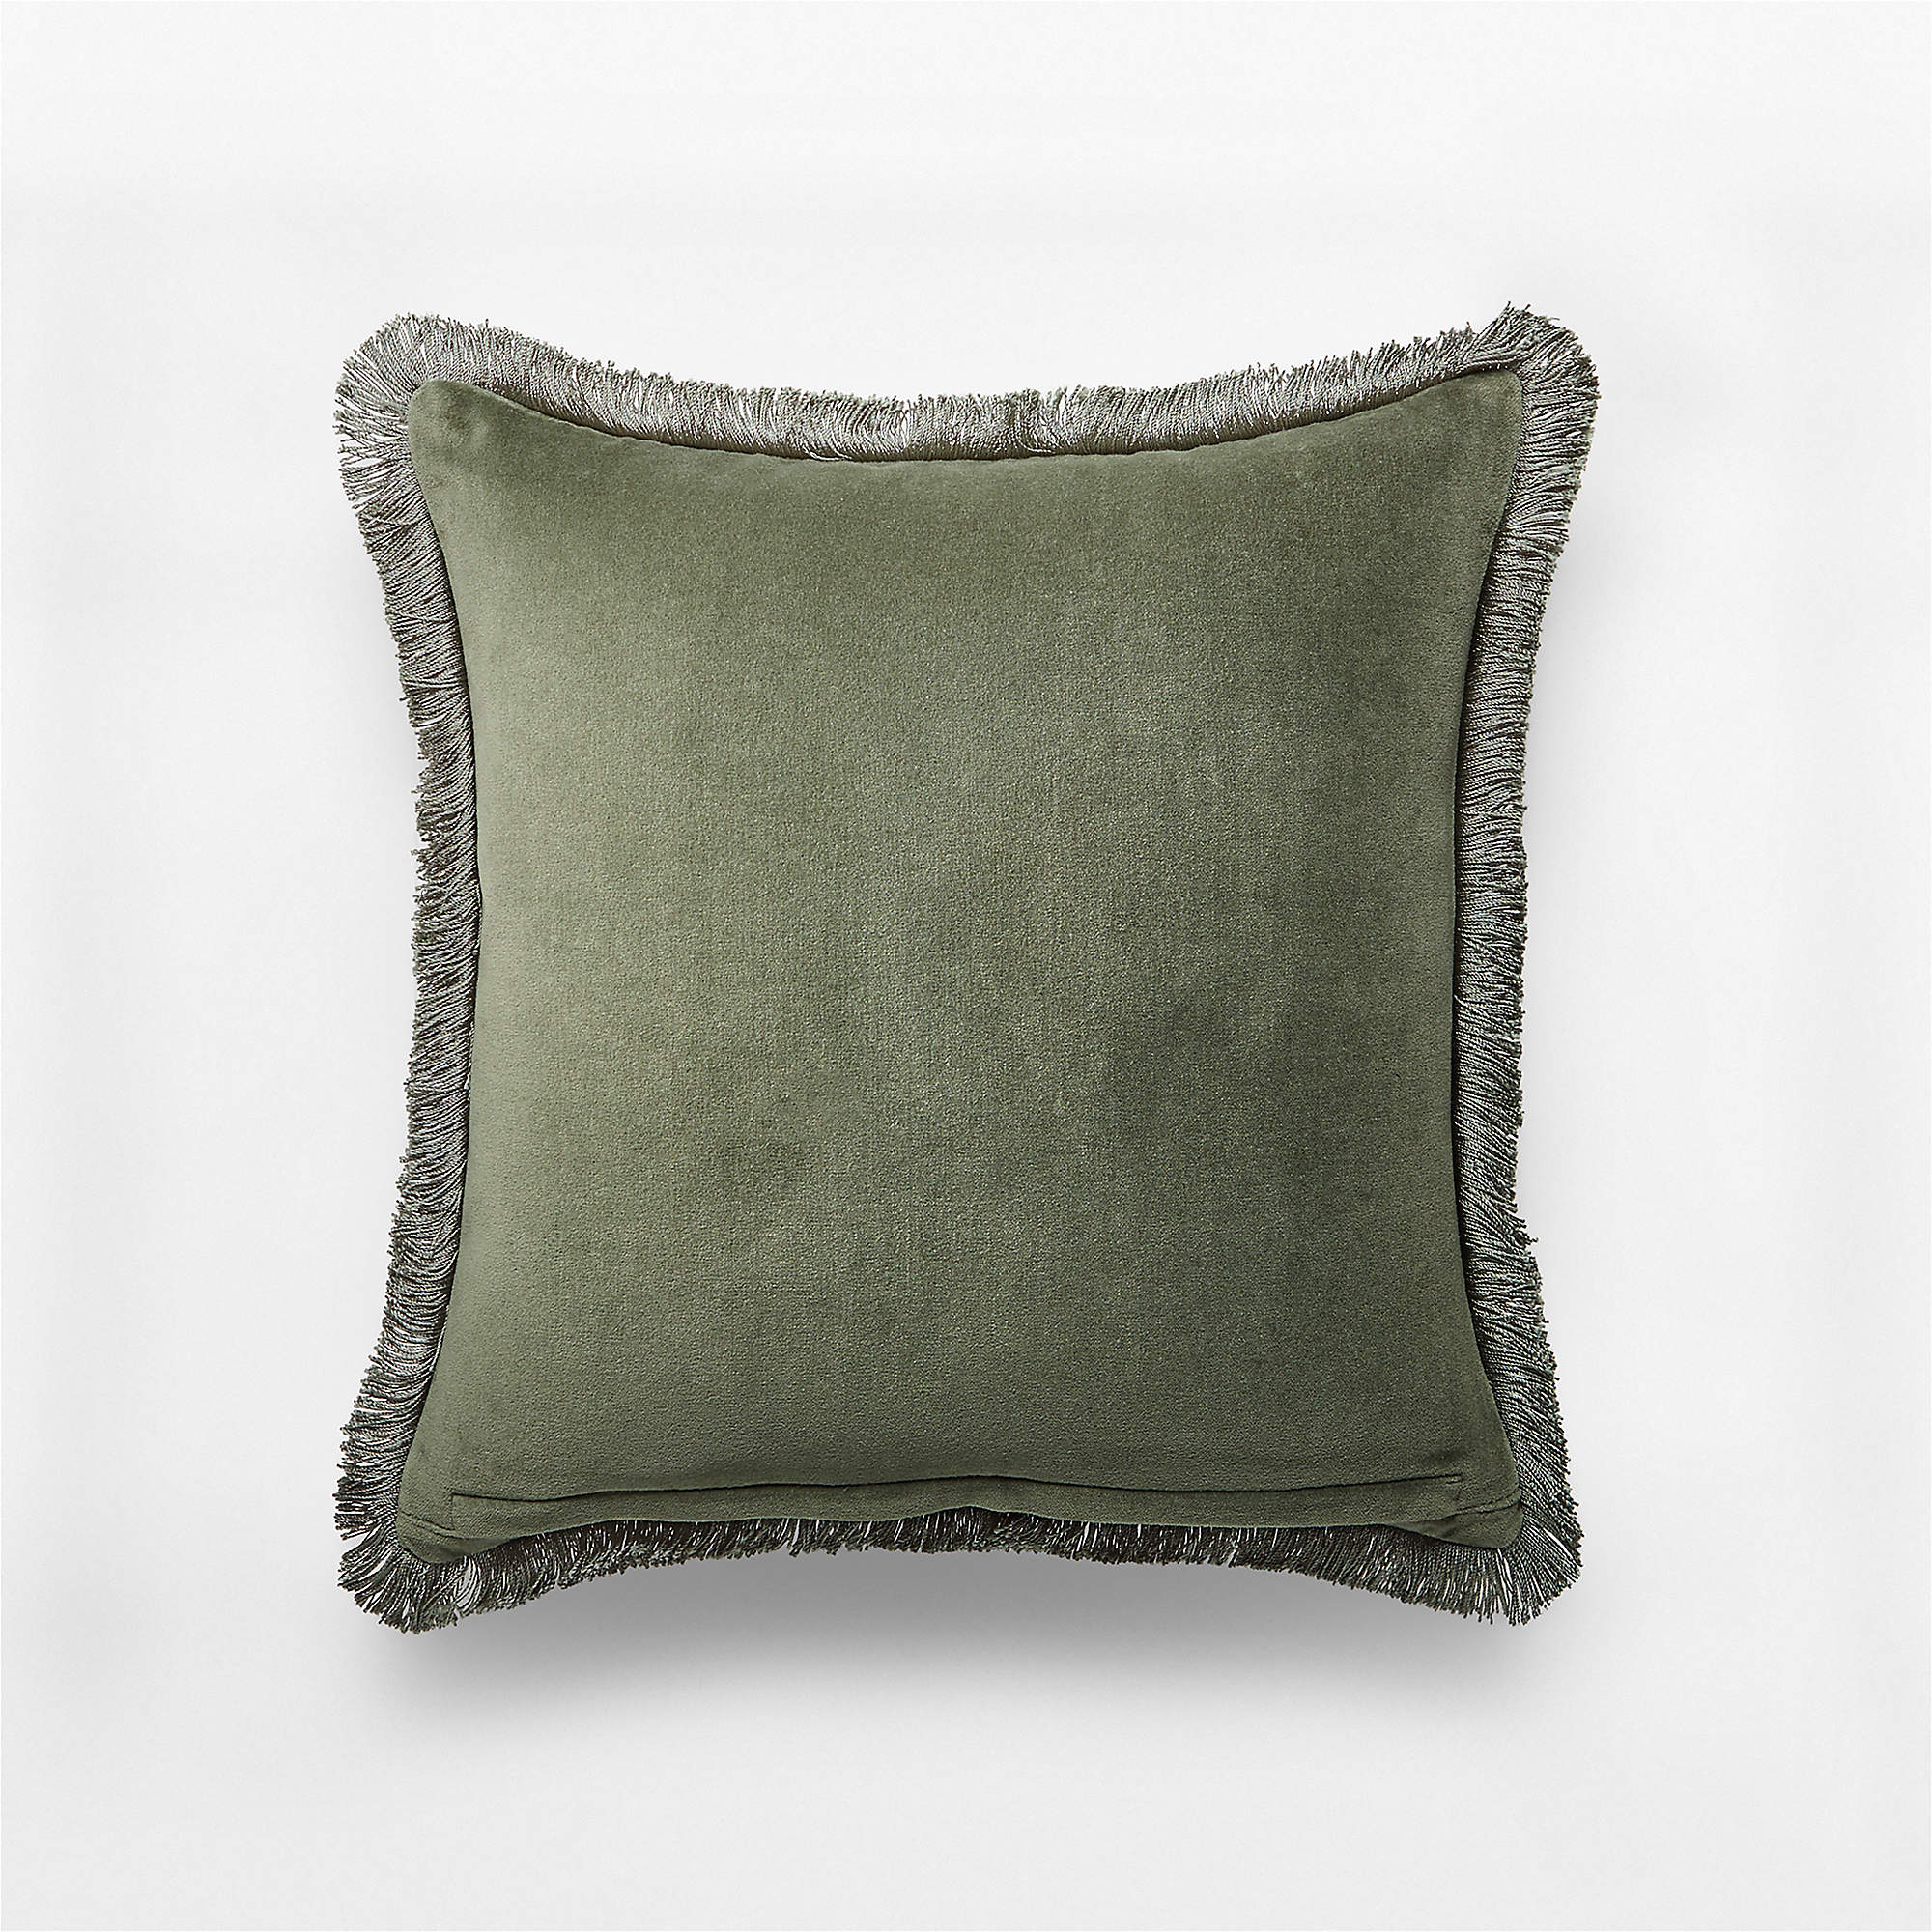 Pillow with Insert 16x16